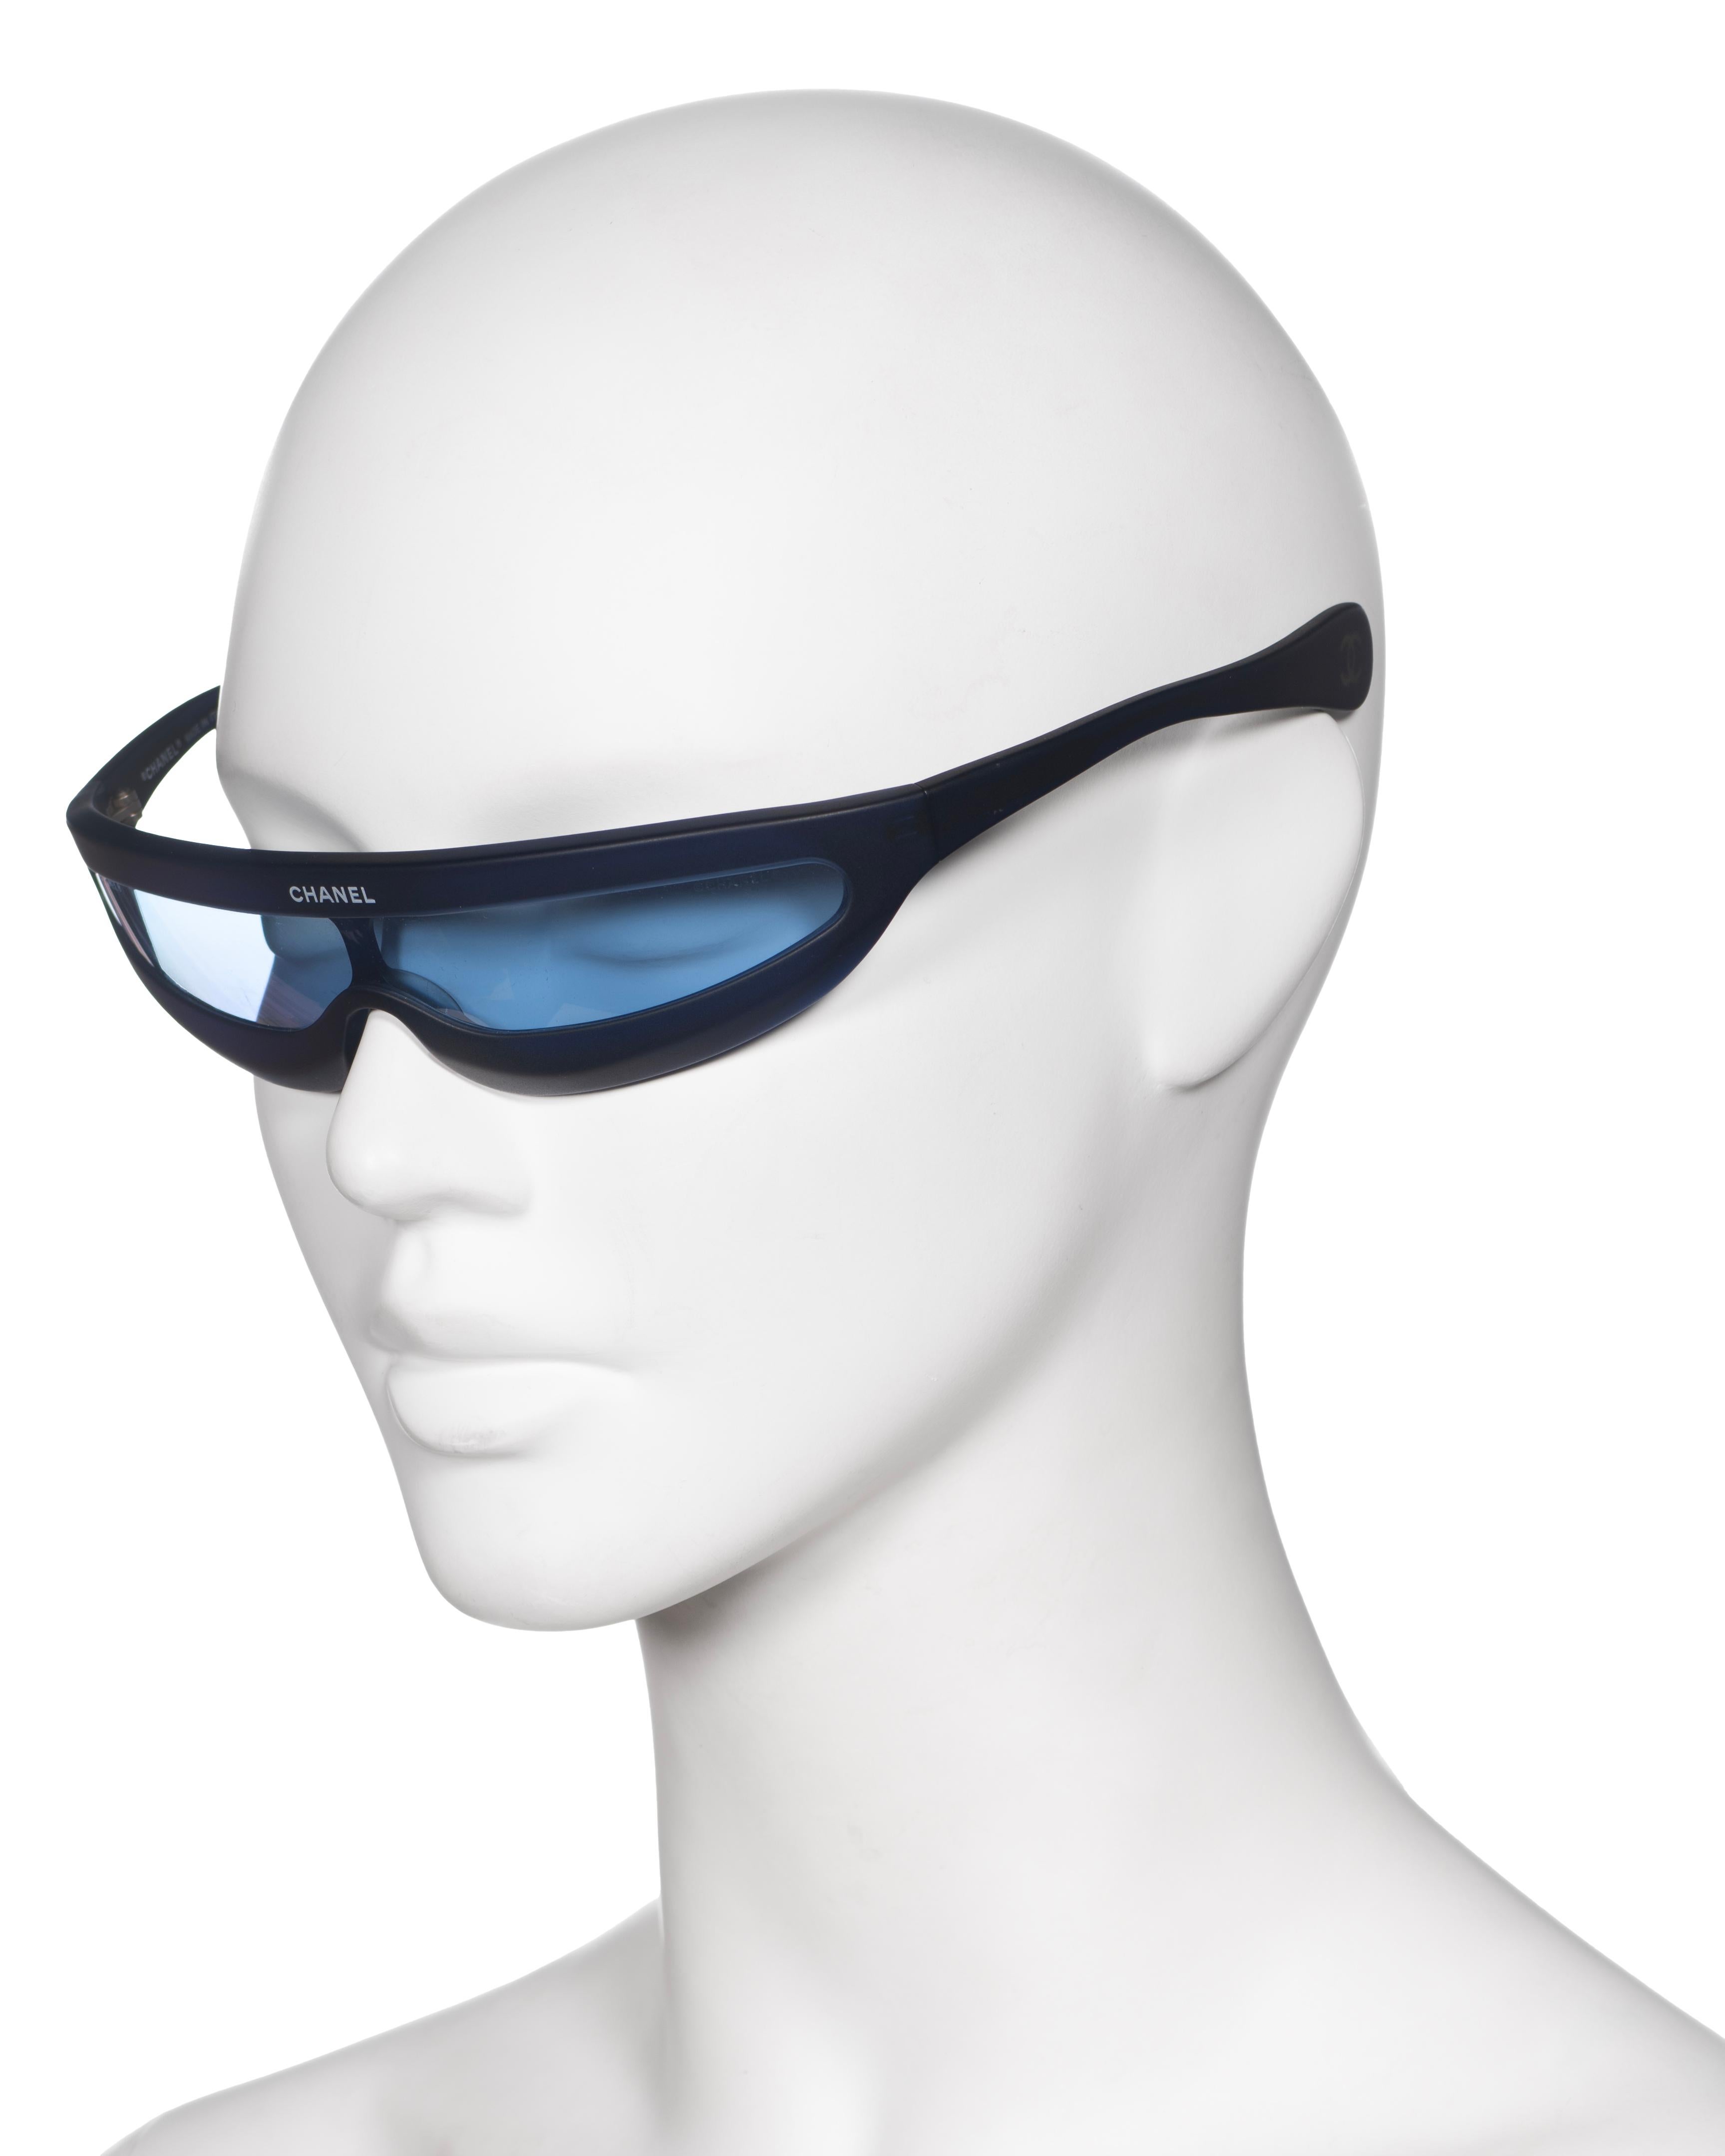 Chanel by Karl Lagerfeld Blue Monolens Sunglasses, ss 2001 6